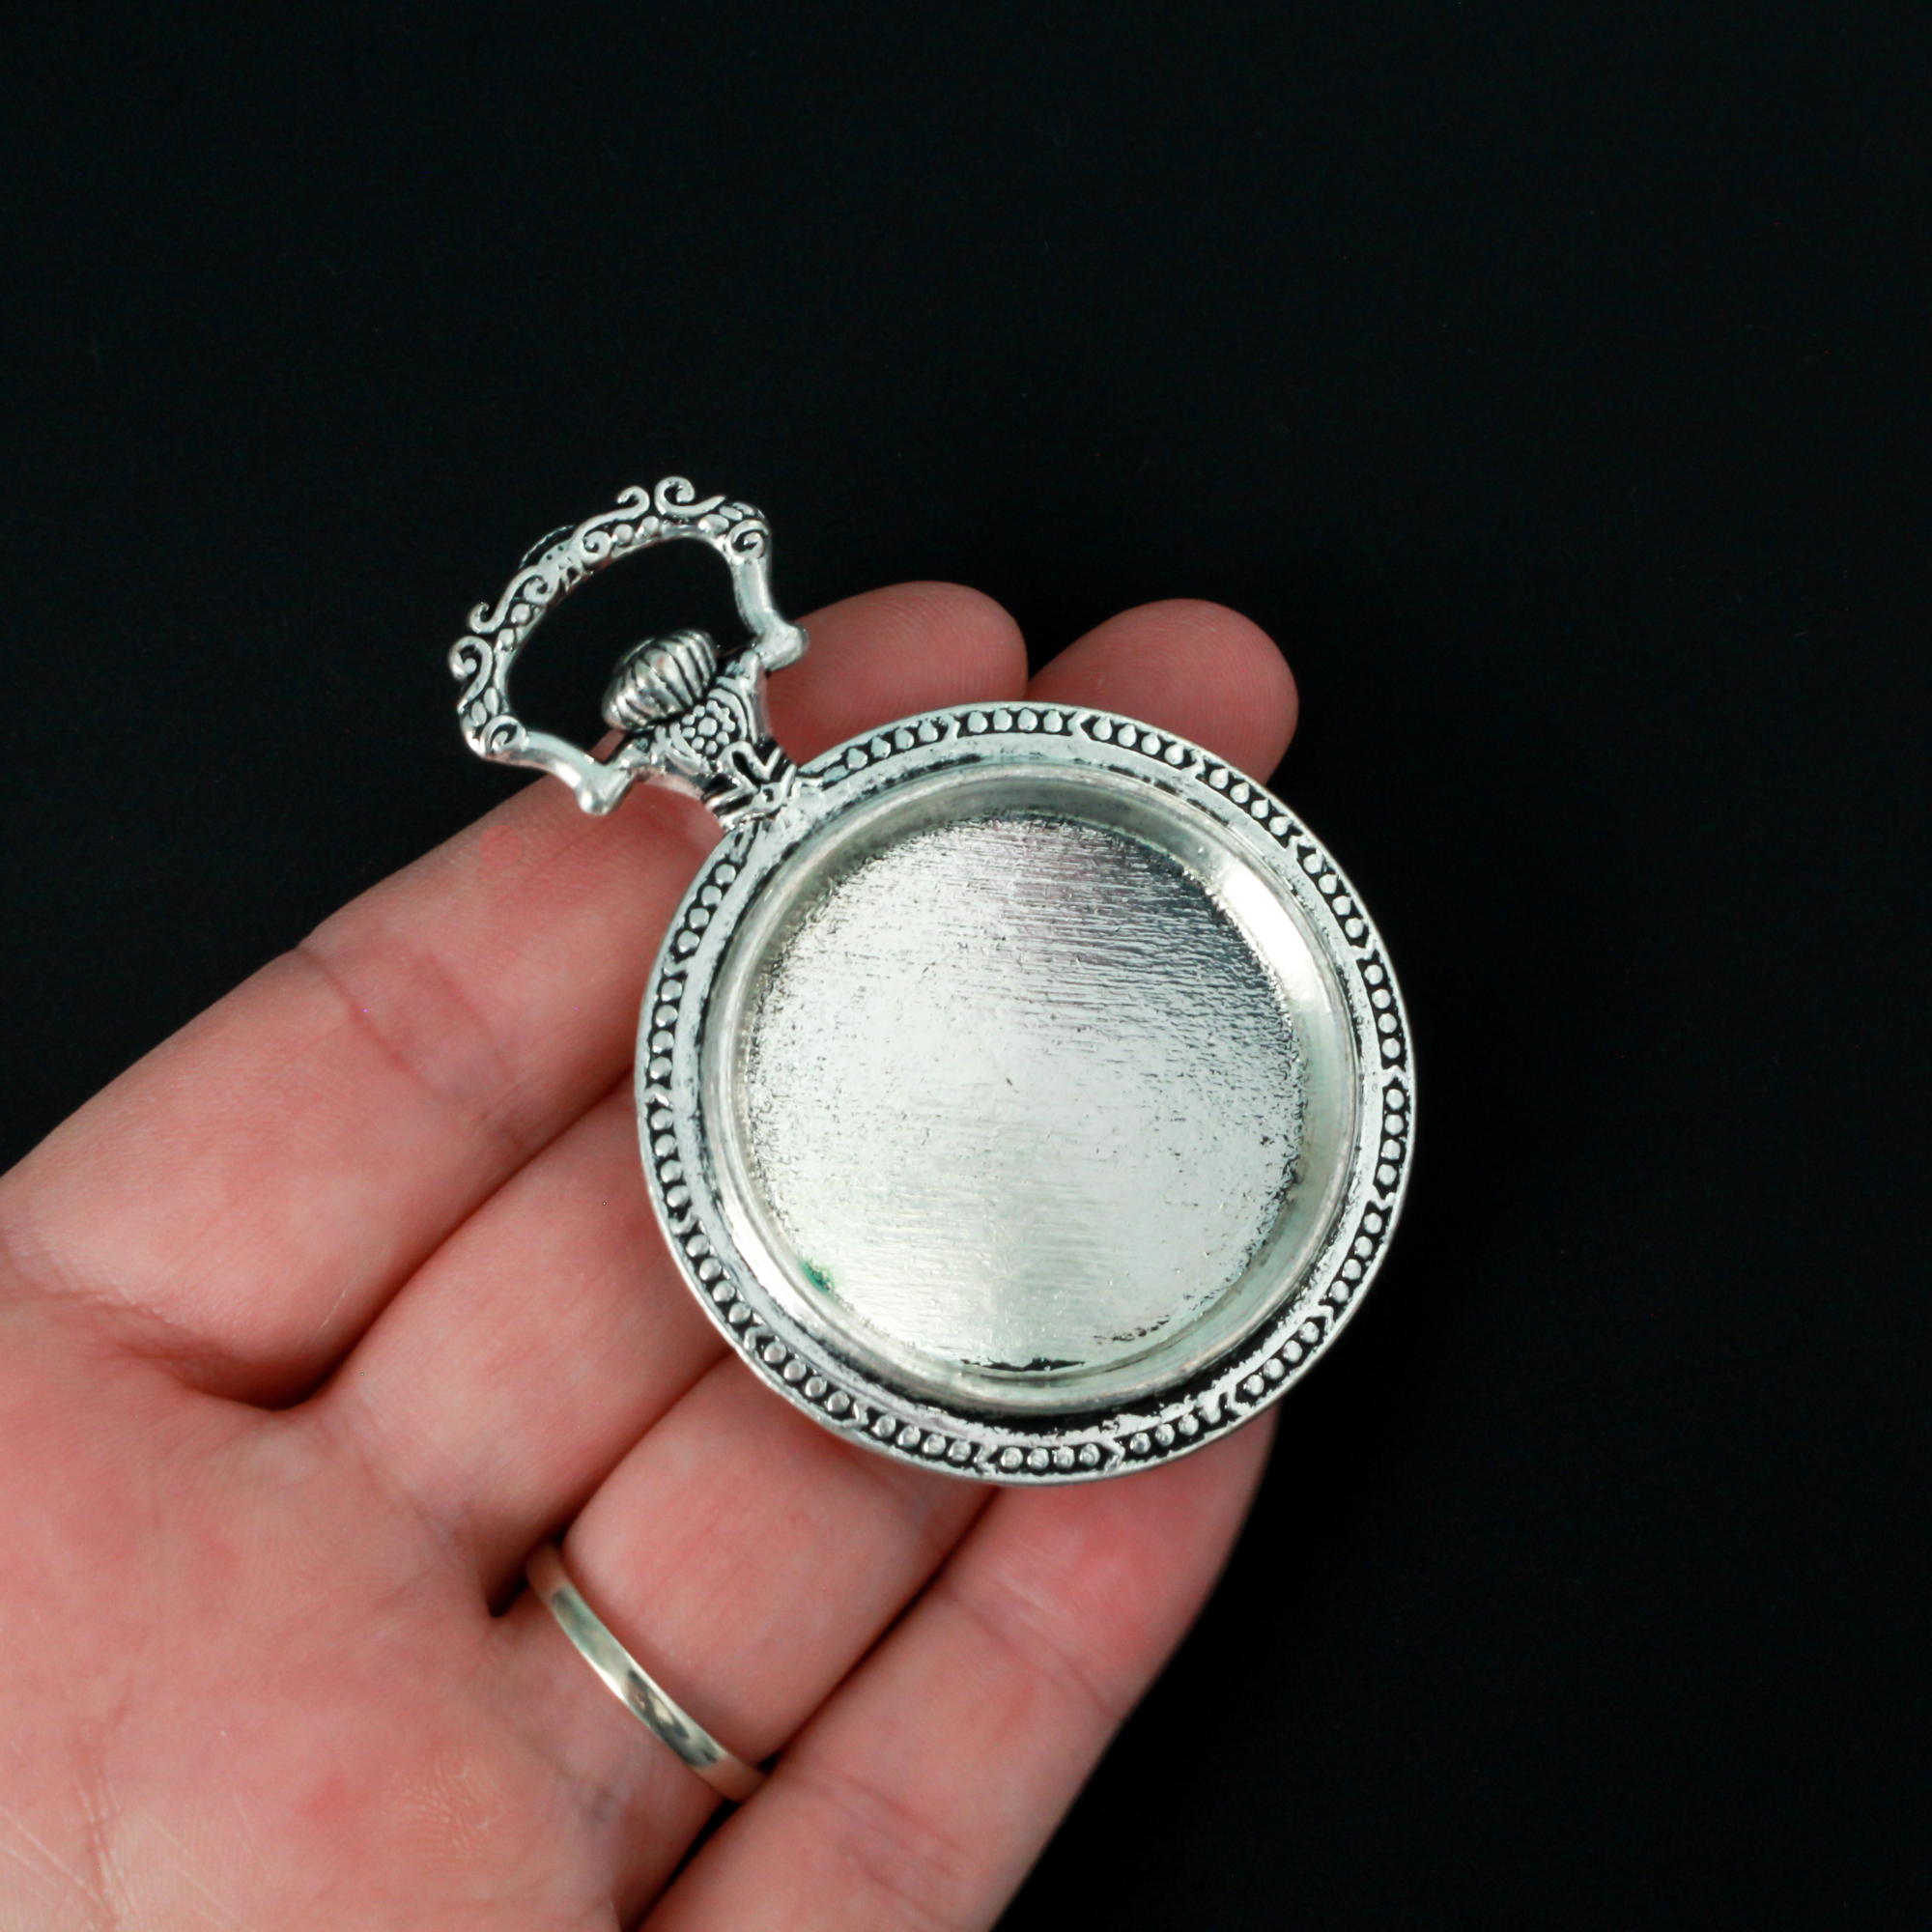 Large silver cabochon setting shaped like an old ornate pocket watch with a 33mm tray.